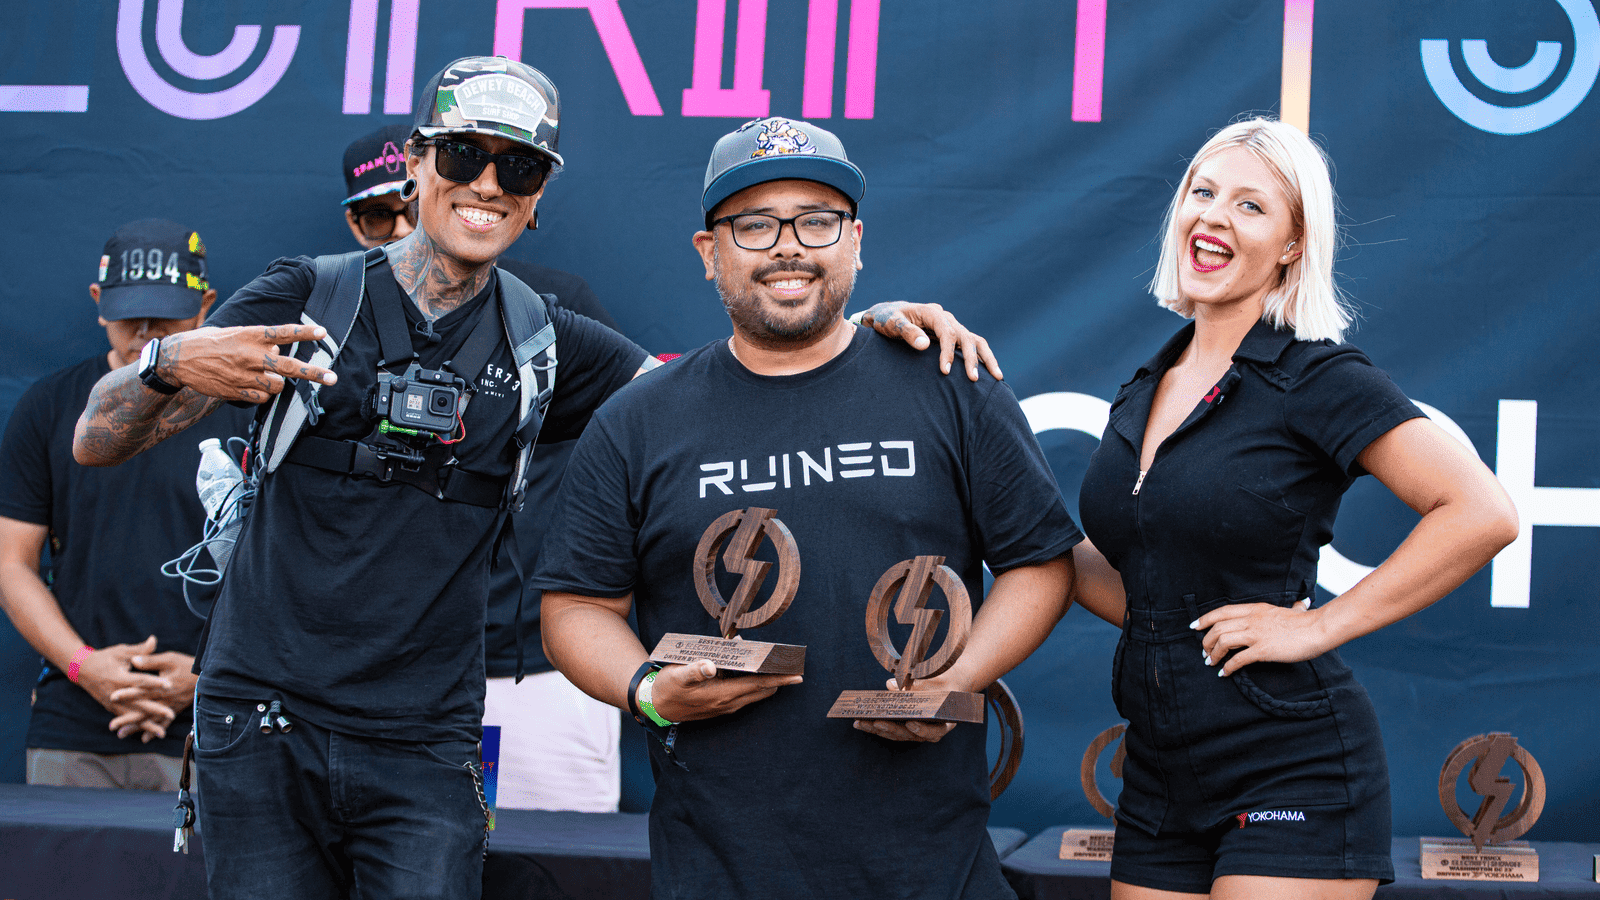 Photo of David Perez and AJ Velasco of RUINED EV accepting award for Best Crew with Yokohama car model at Electrify Showoff in Washington, DC.